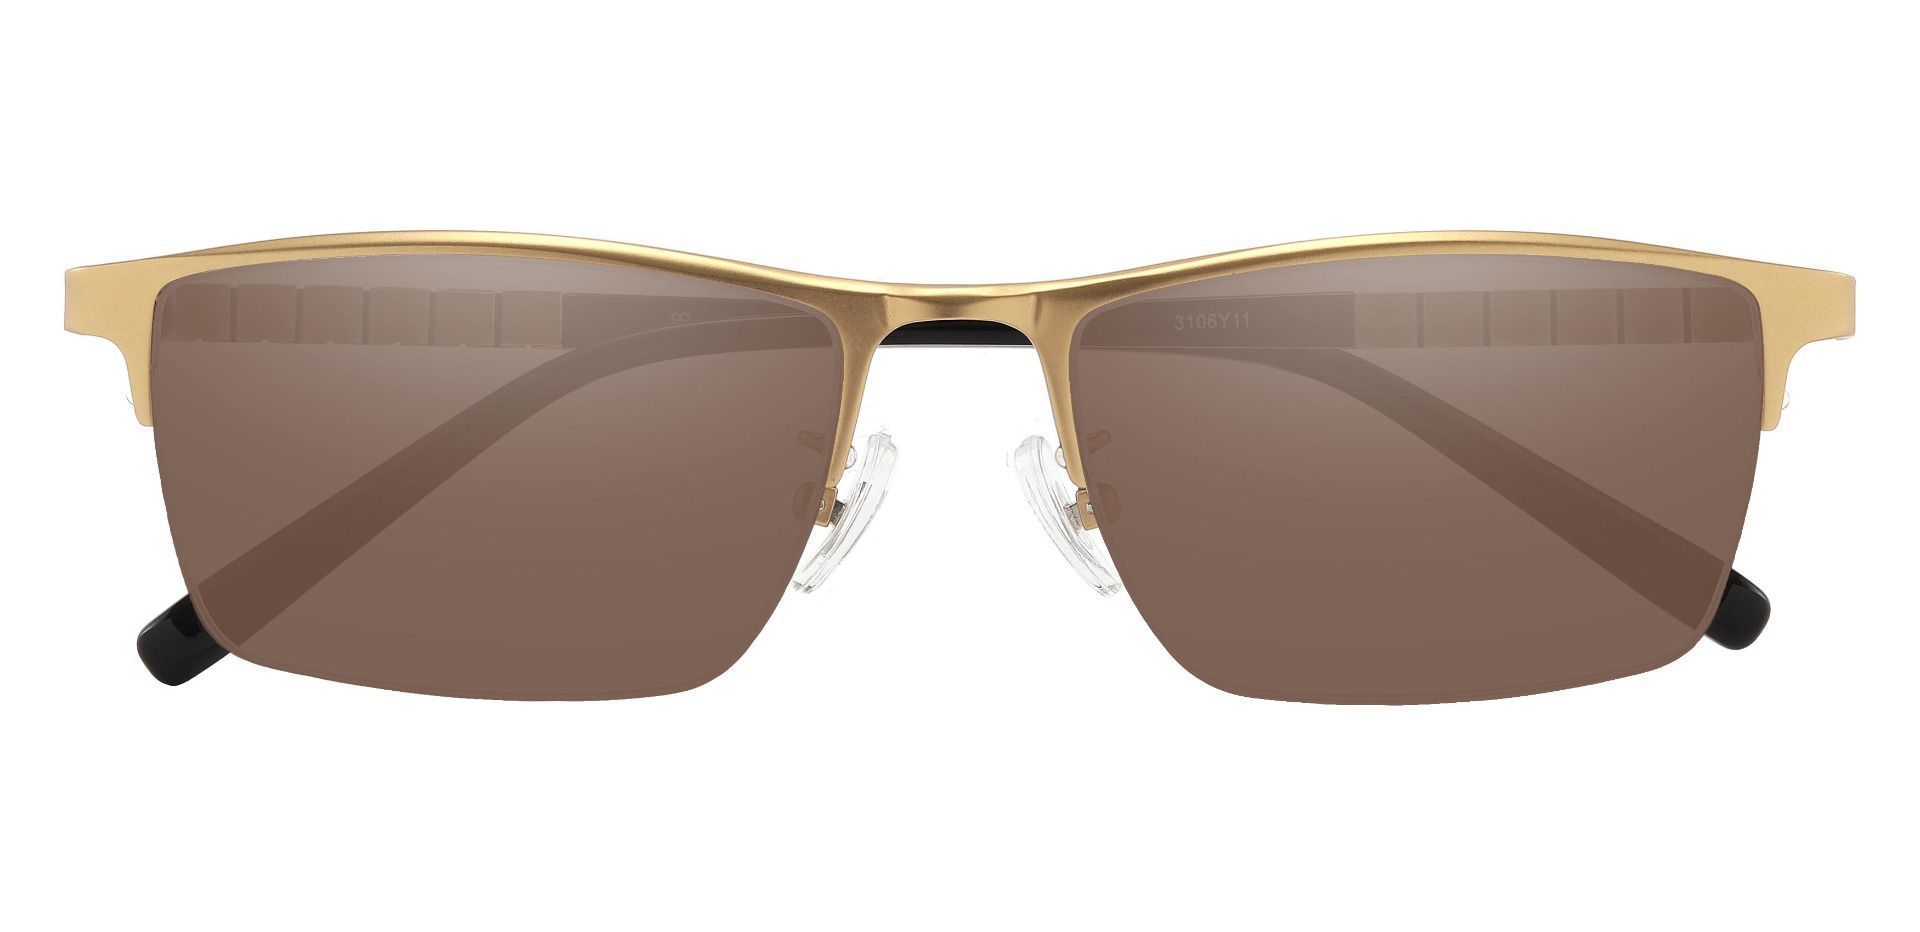 Maine Rectangle Reading Sunglasses - Gold Frame With Brown Lenses